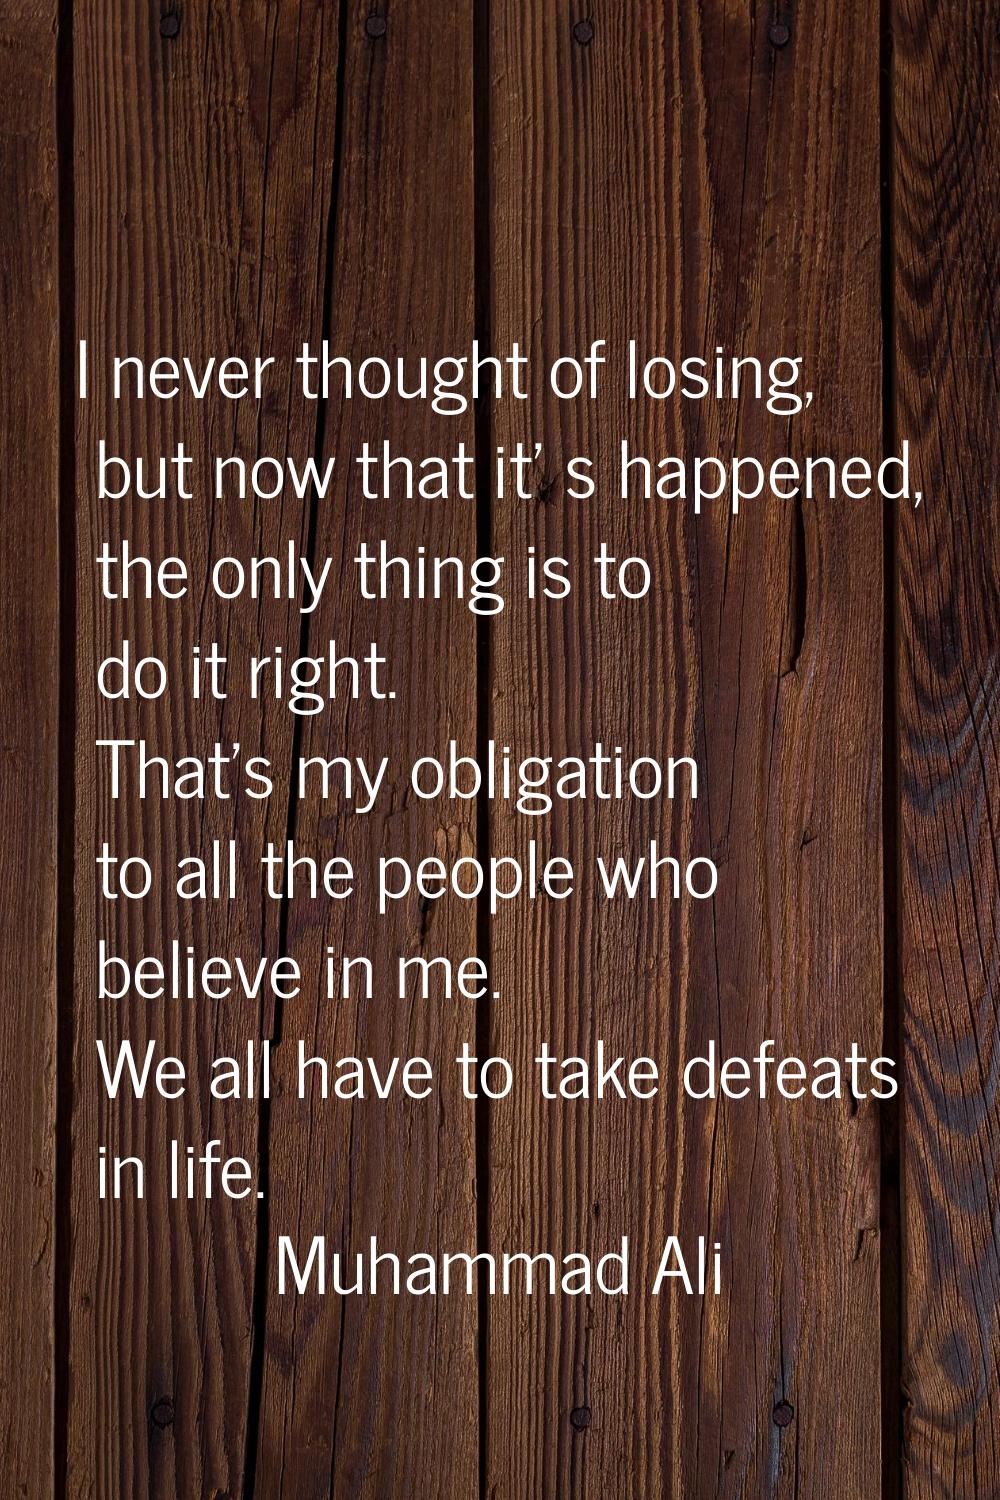 I never thought of losing, but now that it' s happened, the only thing is to do it right. That's my